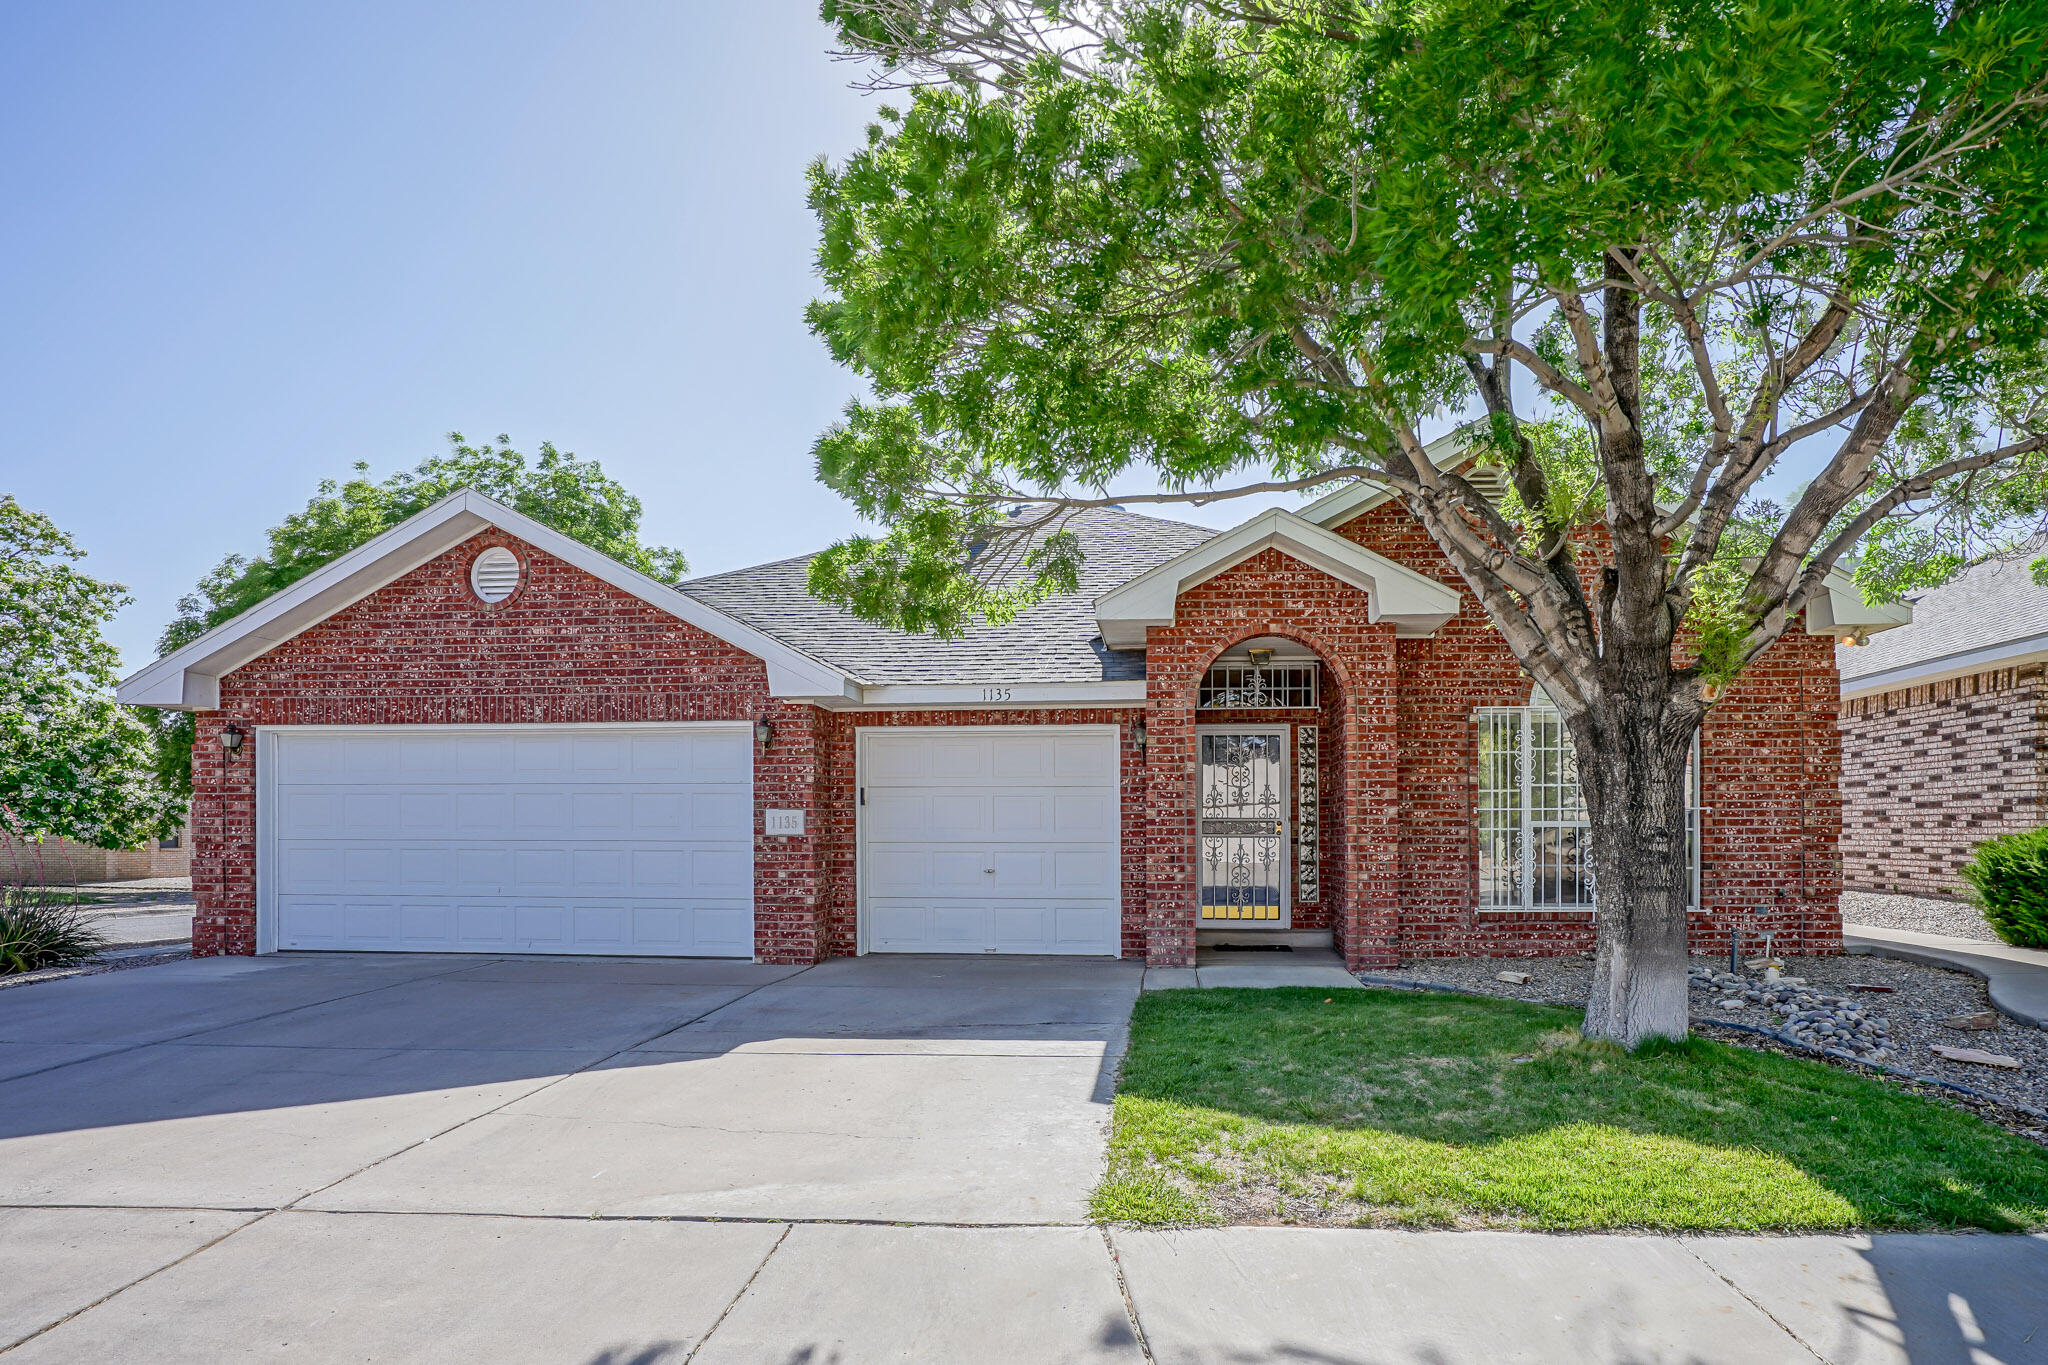 Open House Saturday 5/28 11am-2pm Terrific One Owner Home in desirable subdivision of Willow Wood. Corner Lot, 3 car garage, 2 master bedrooms with walk-out patio doors, 2 large living areas, 3 full baths, gas fireplace, large backyard fountain.  Tons of storage space, Just minutes to I-40, Sandia Labs and Kirkland AFB.  All original, ready for the new owner to cast their own style and updates!  This won't last!